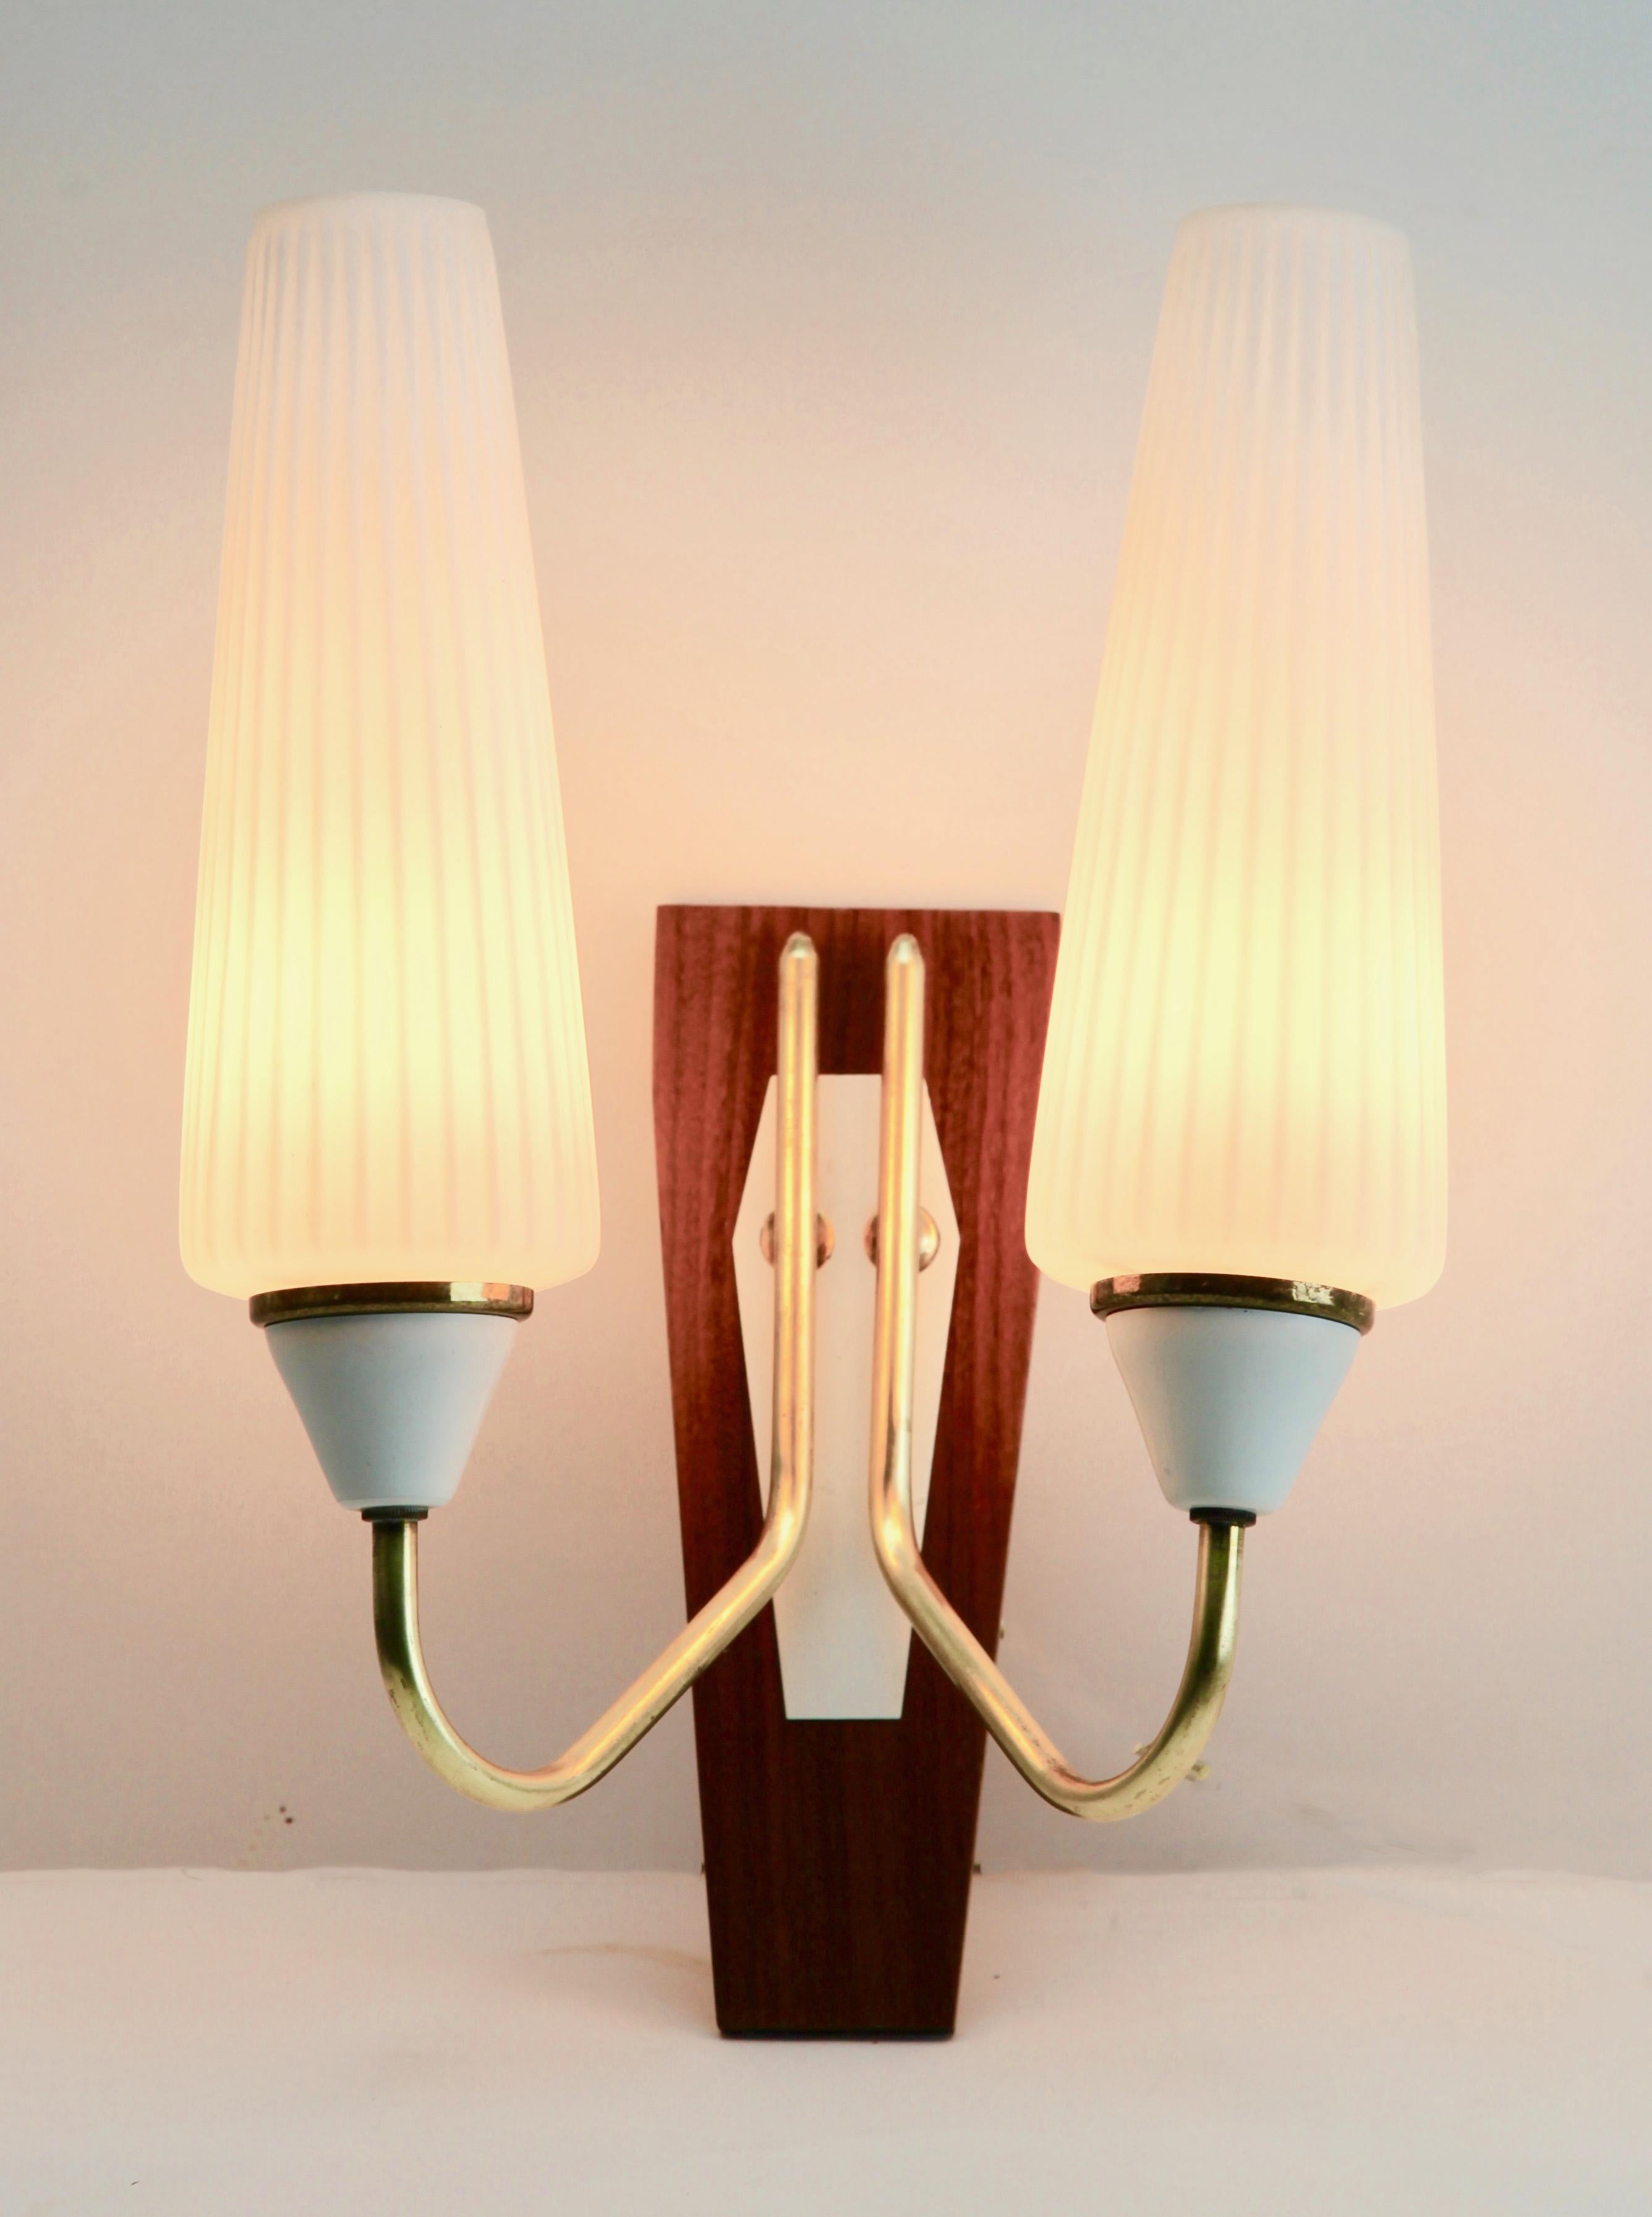 Vintage 2 arms wall mount lamp in the style of Stilnovo, Italian, 1960s.

In excellent condition and in full working order. Fitting E14

The lamp works everywhere in the World

with original old patina on brass parts.
Looks simply